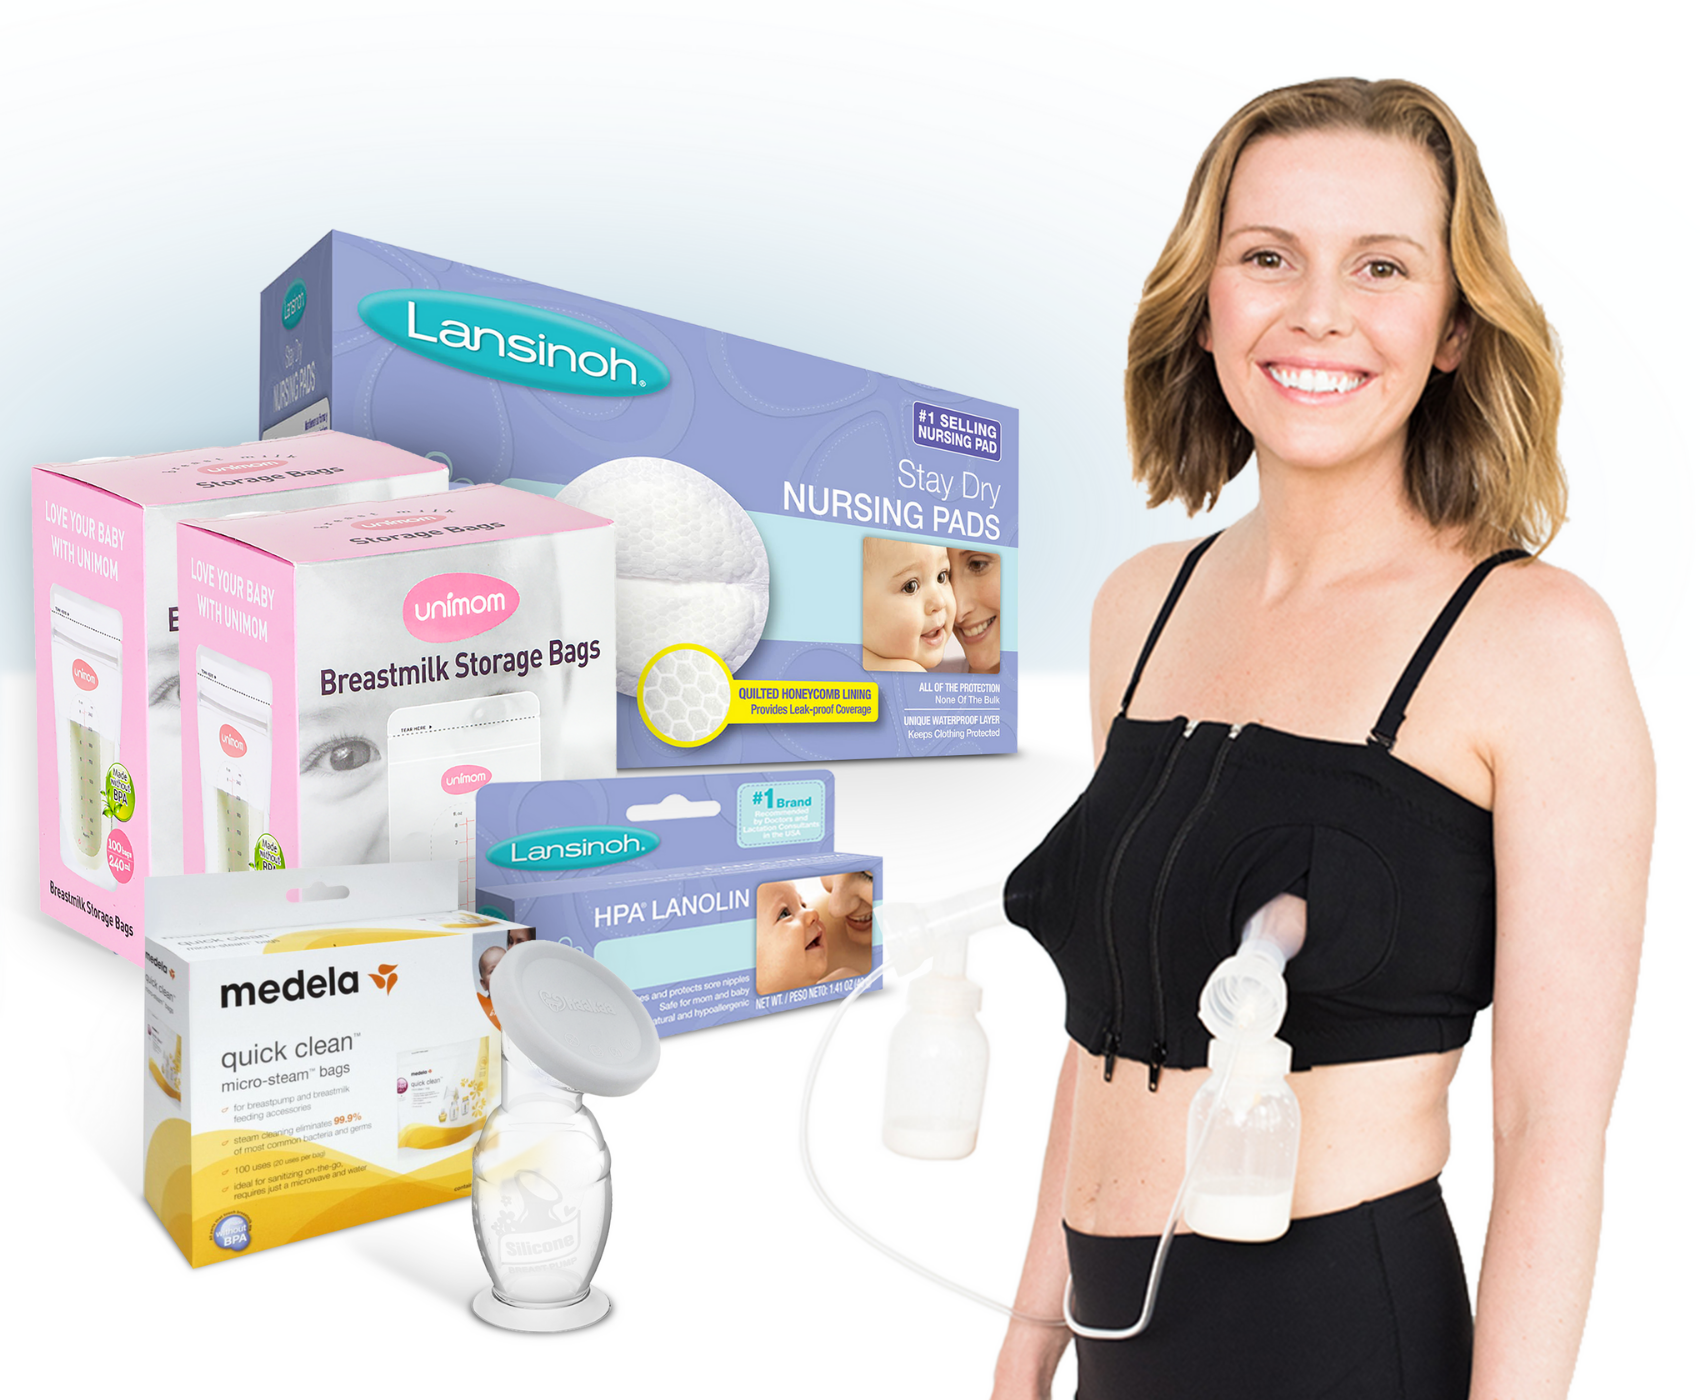 Lansinoh Simple Wishes Hands-Free Pumping Bra, Size XS-L 